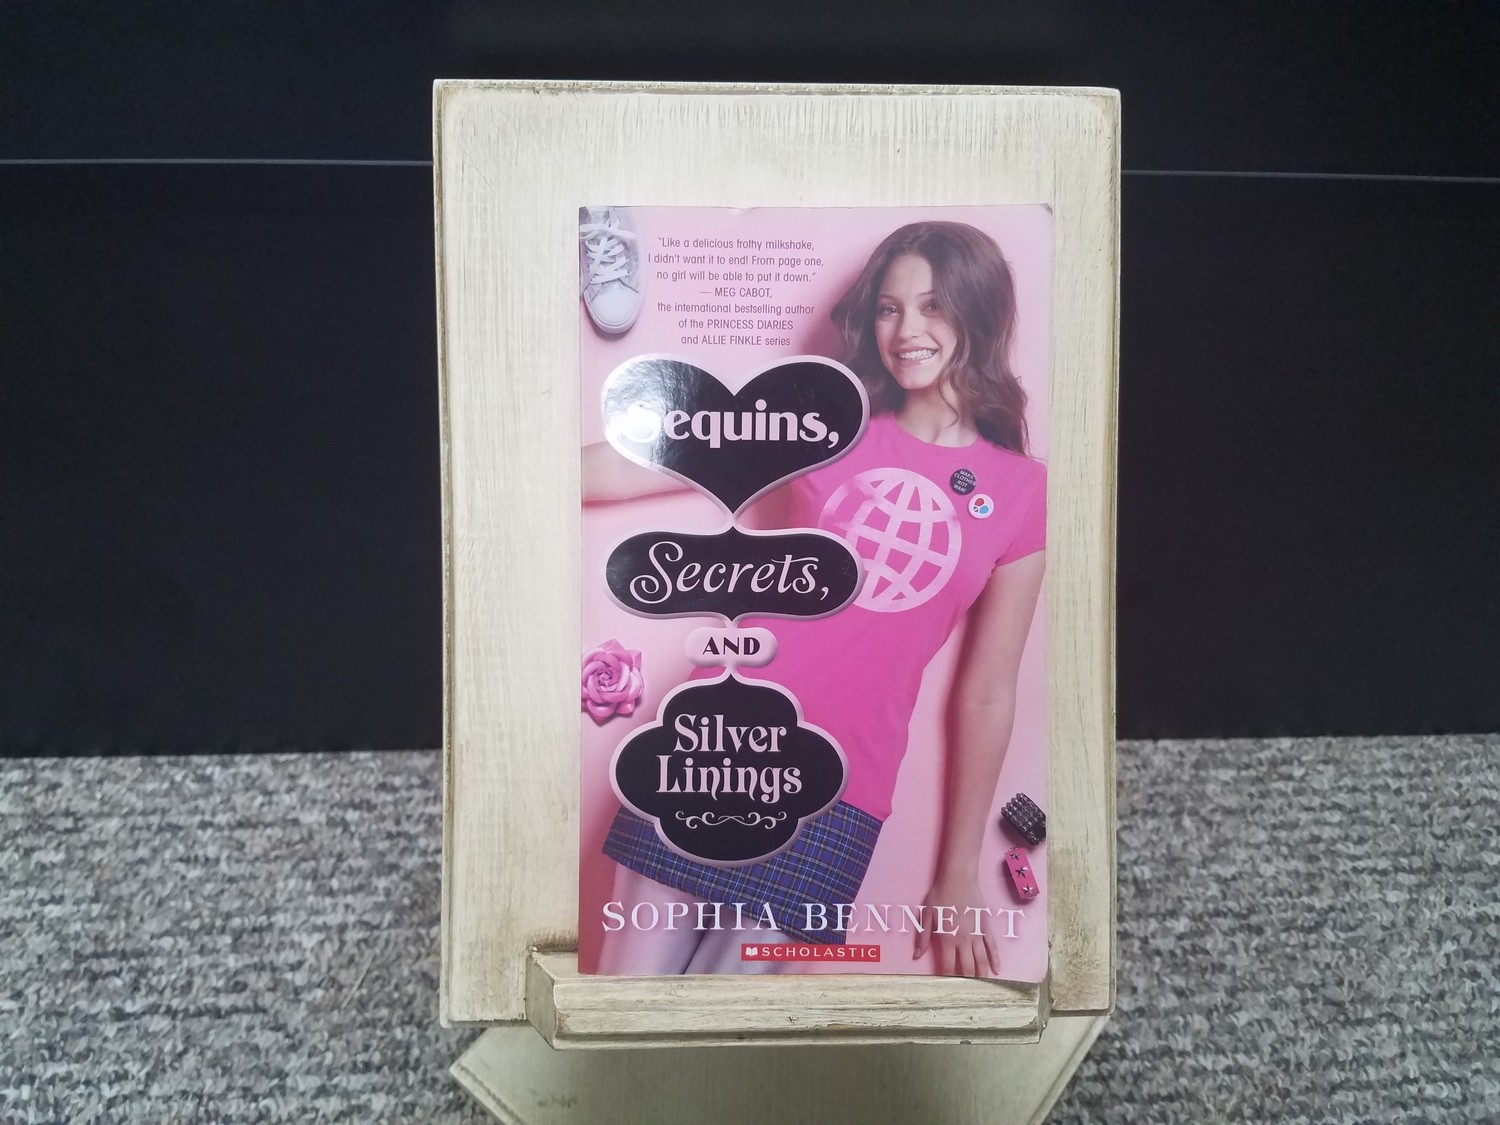 Sequins, Secrets, and Silver Linings by Sophia Bennett